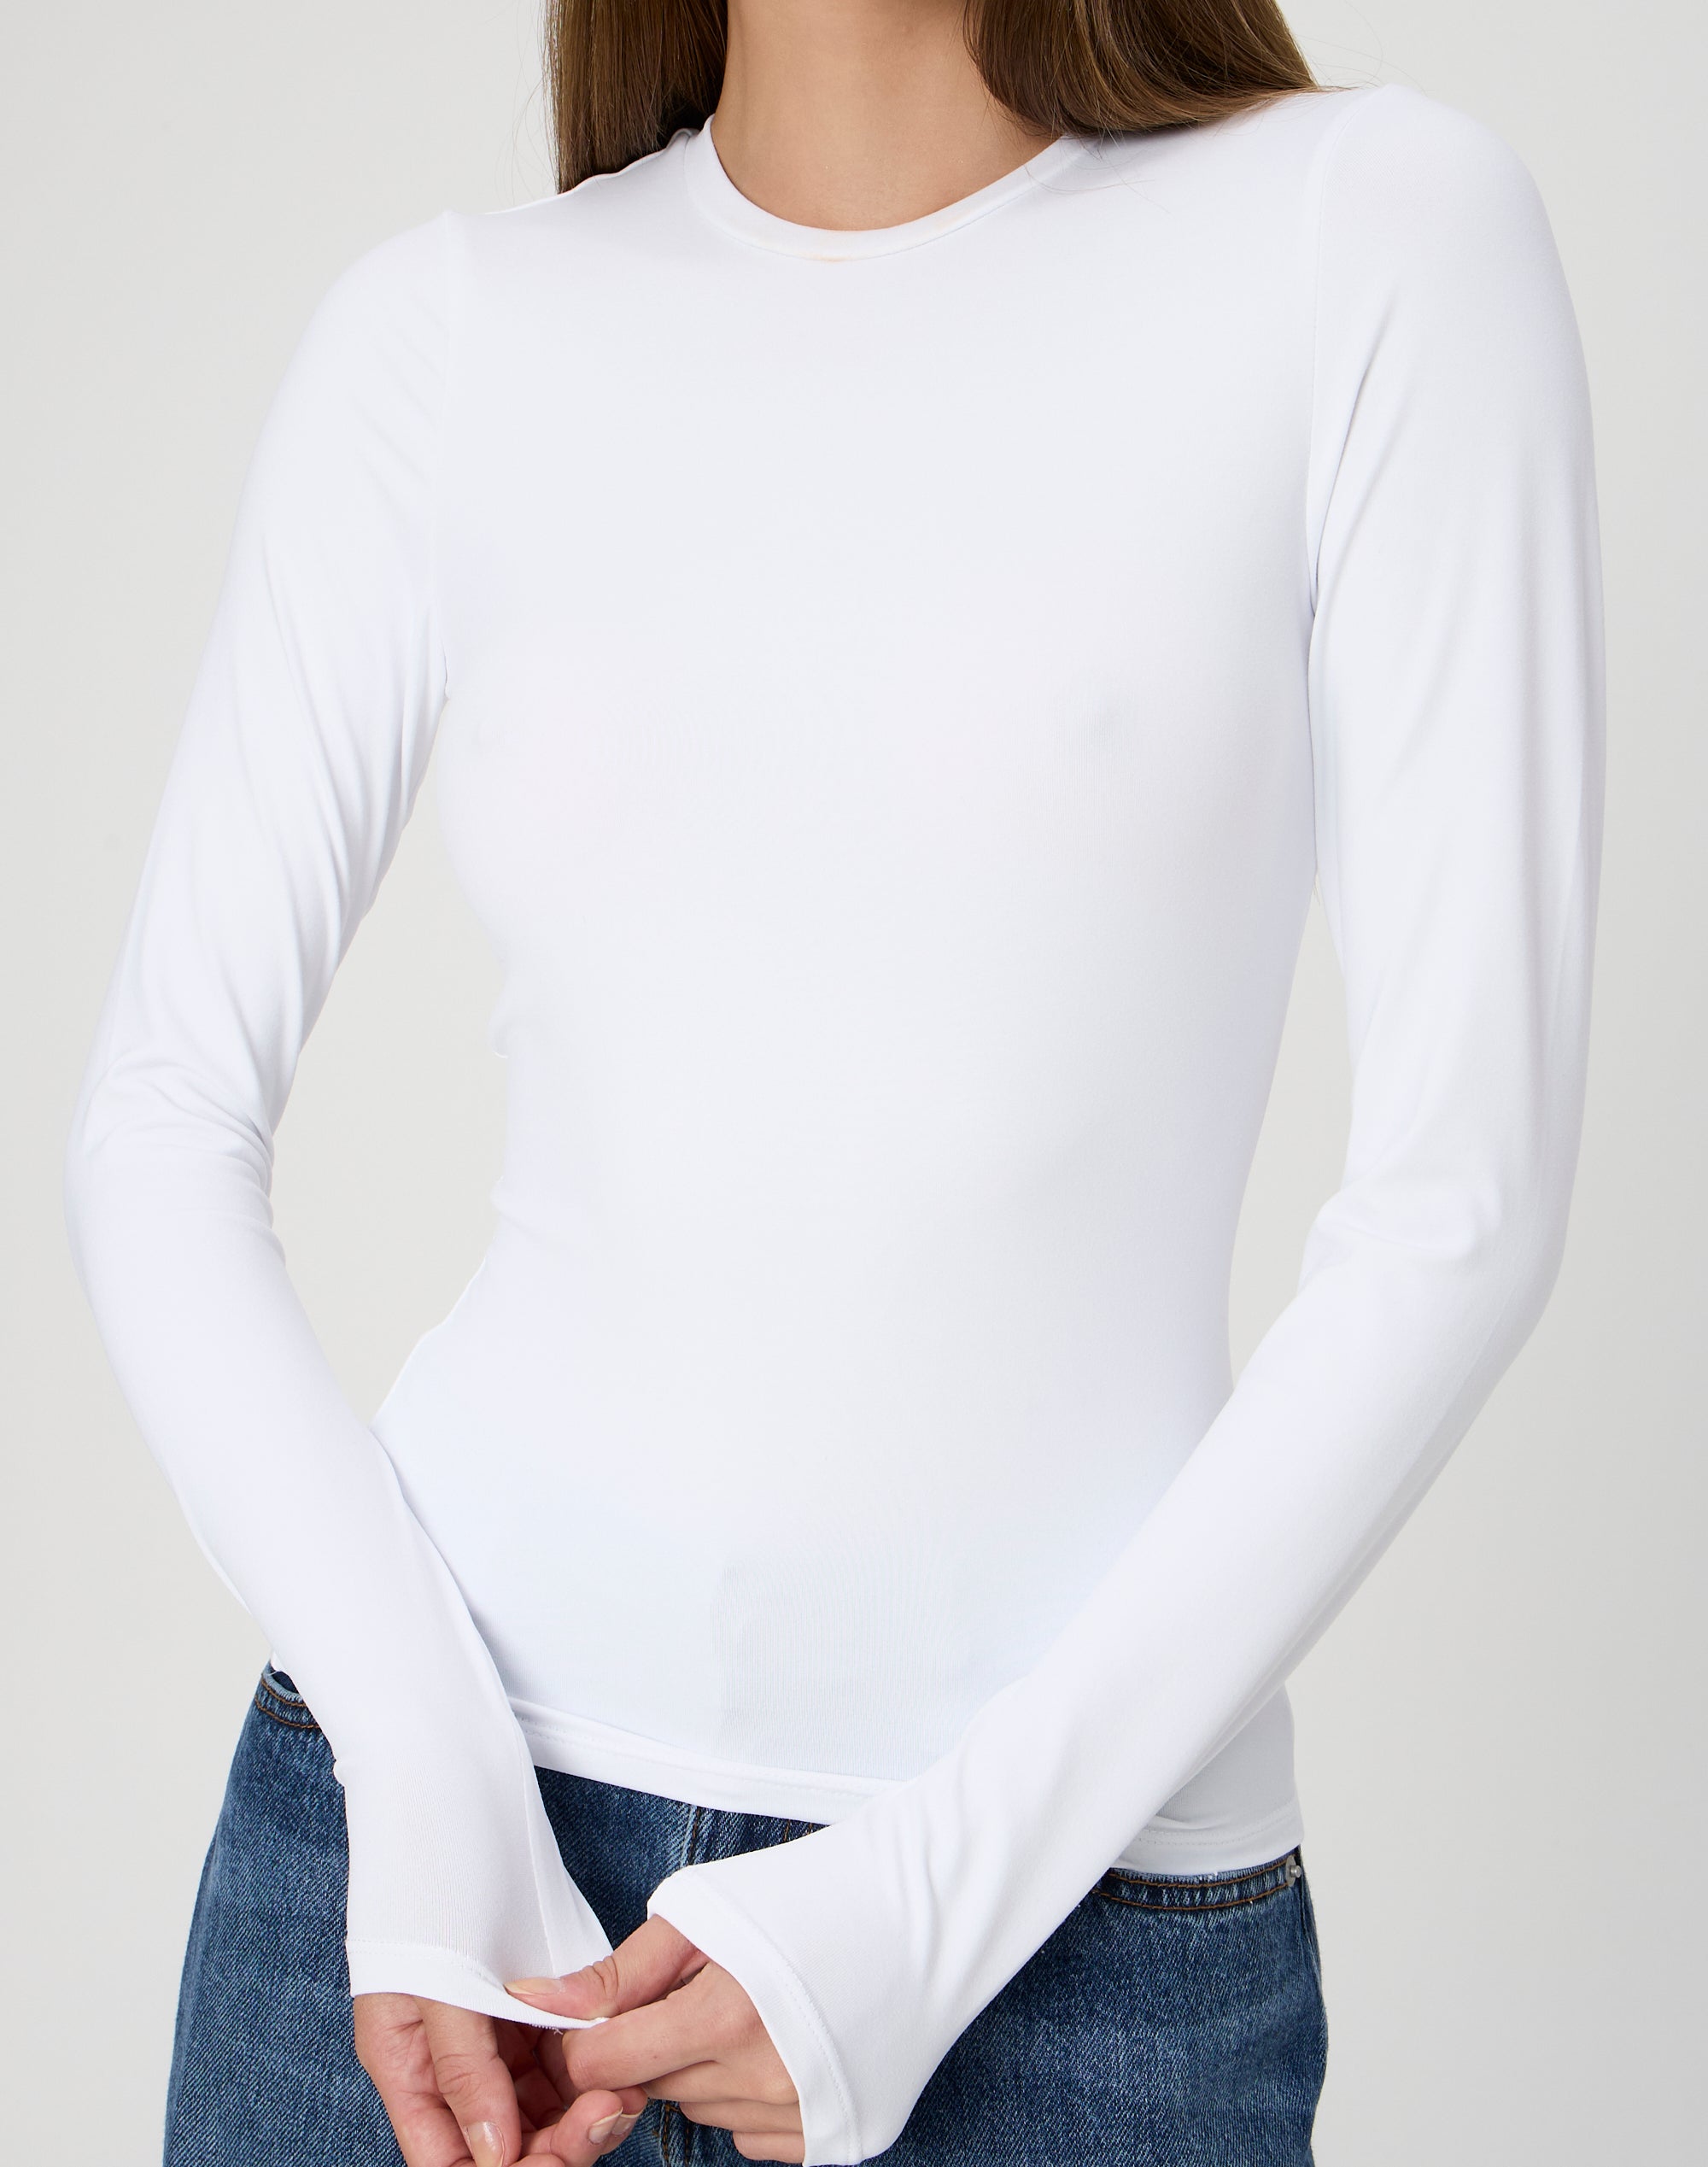 Supersoft Longsleeve Top in White